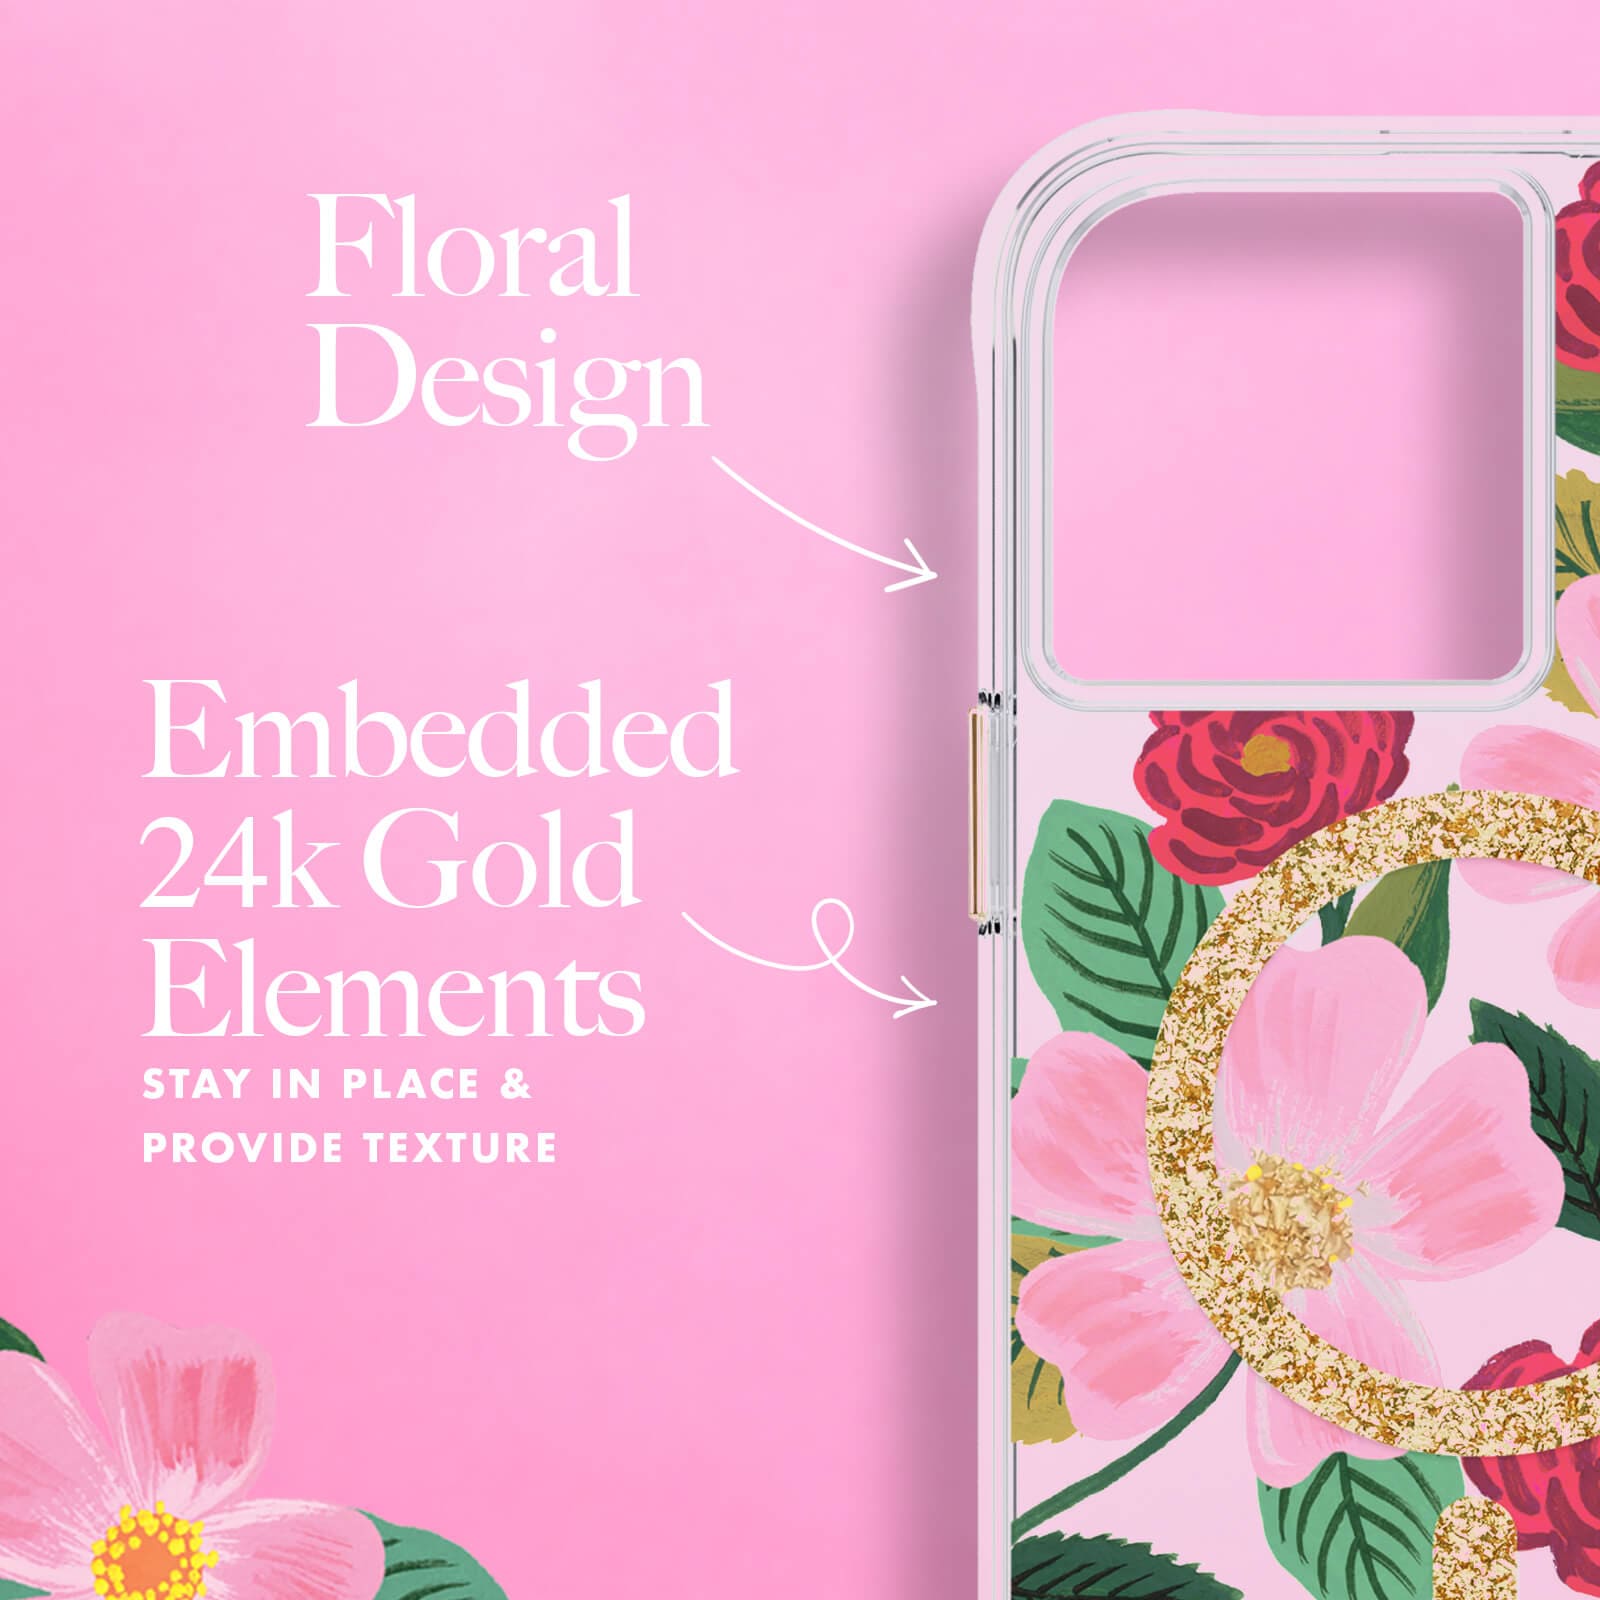 Floral design. Embedded 24k gold elements stay in place & provide texture. color::Rose Garden